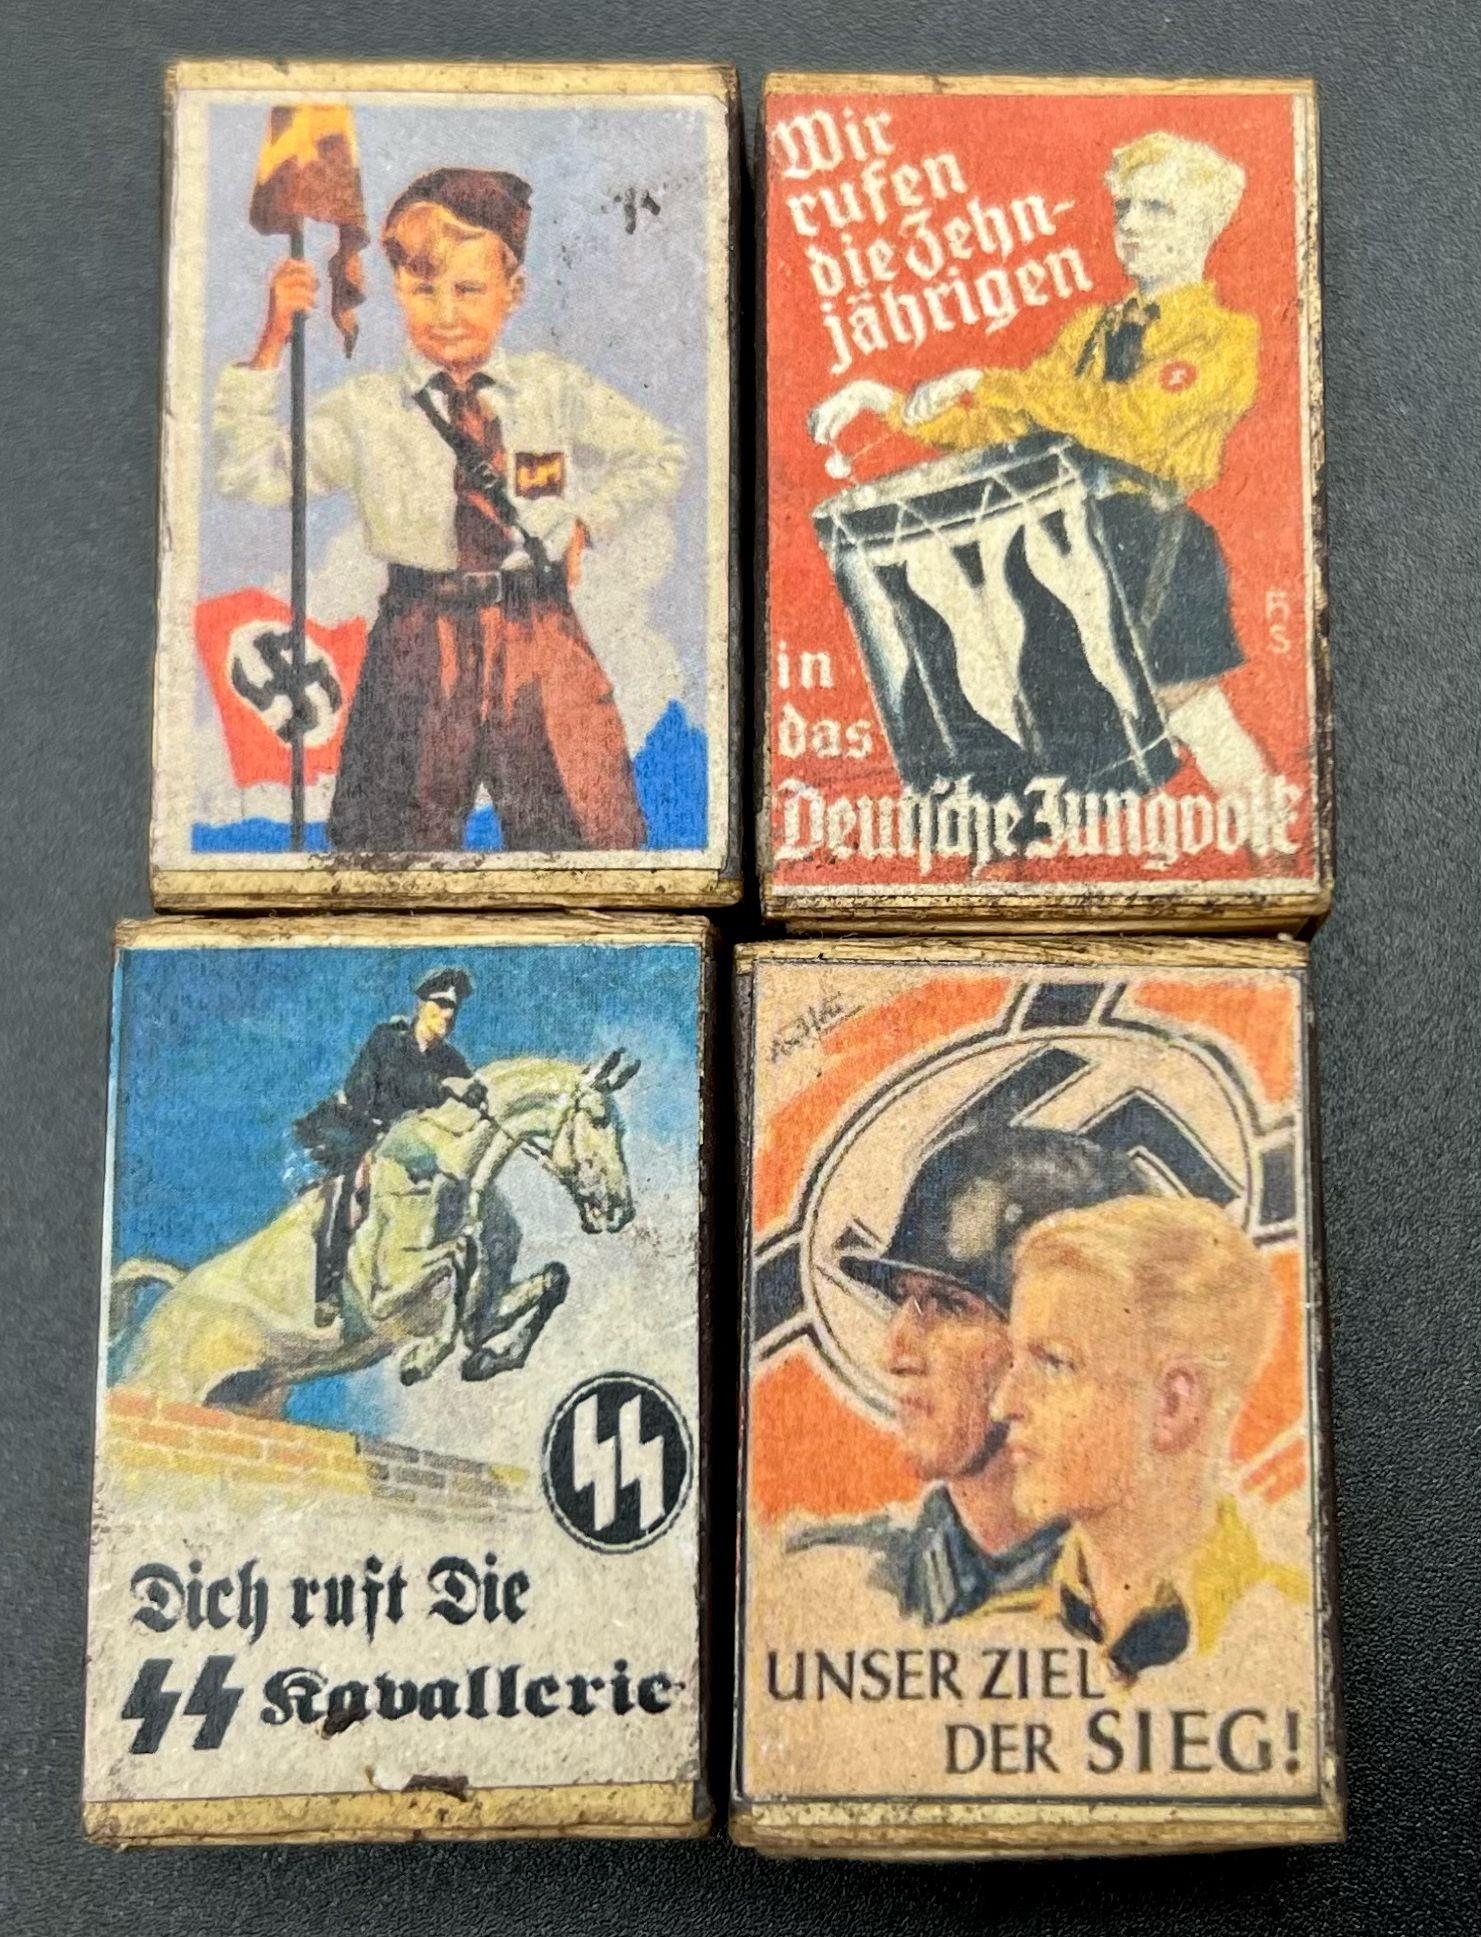 8 x Mini Boxes of Matches. As sold by blind veterans, Hitler Youth etc. - Image 3 of 6